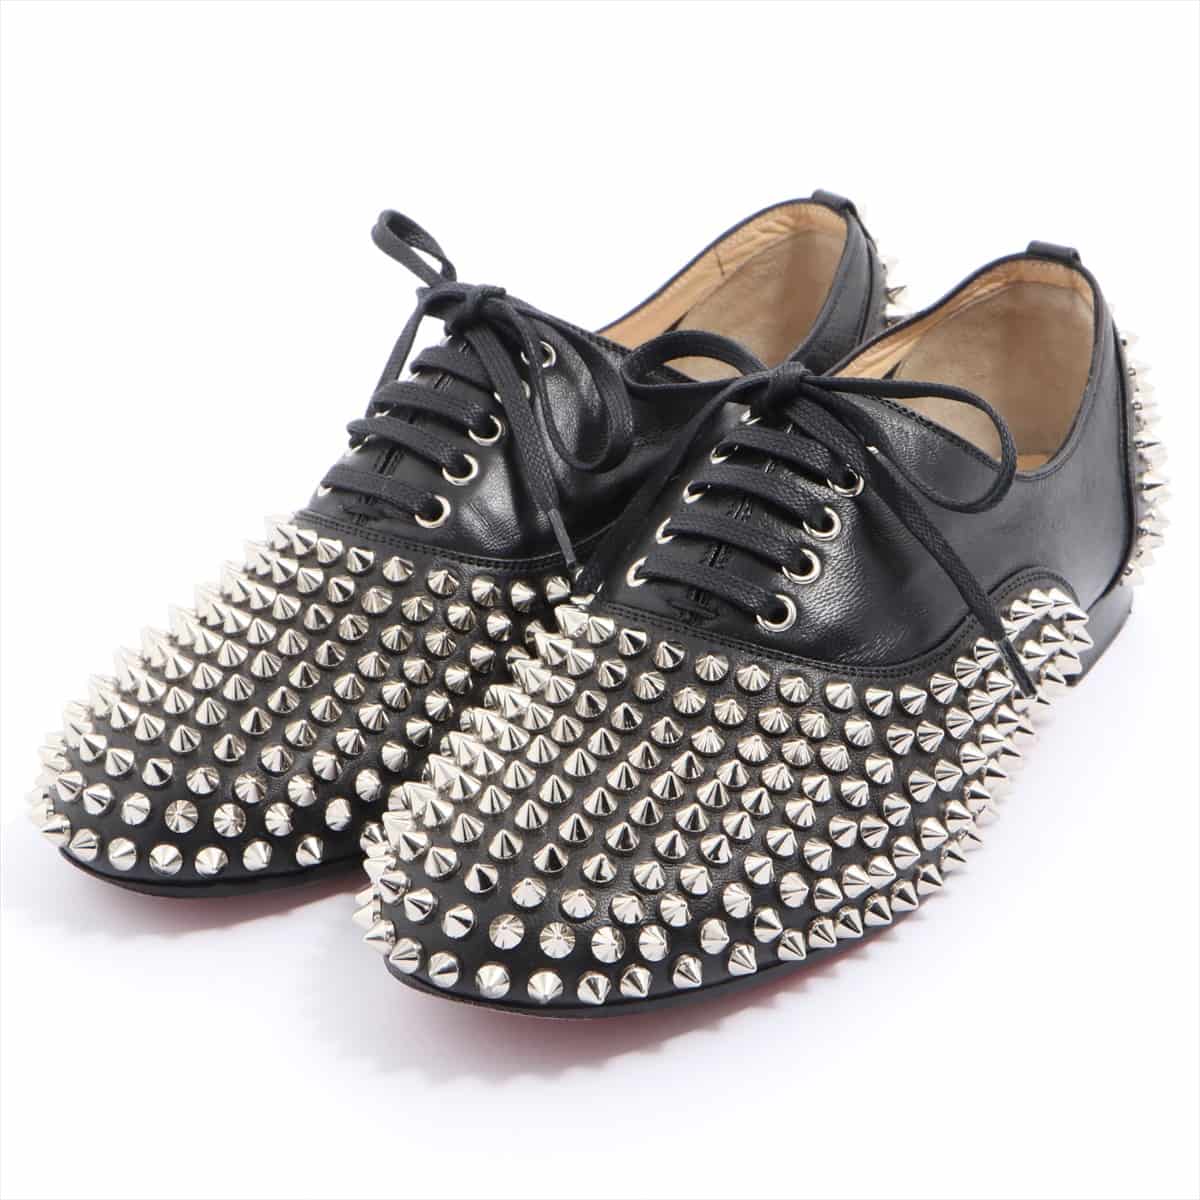 Christian Louboutin Studs Leather Shoes 37 Ladies' Black